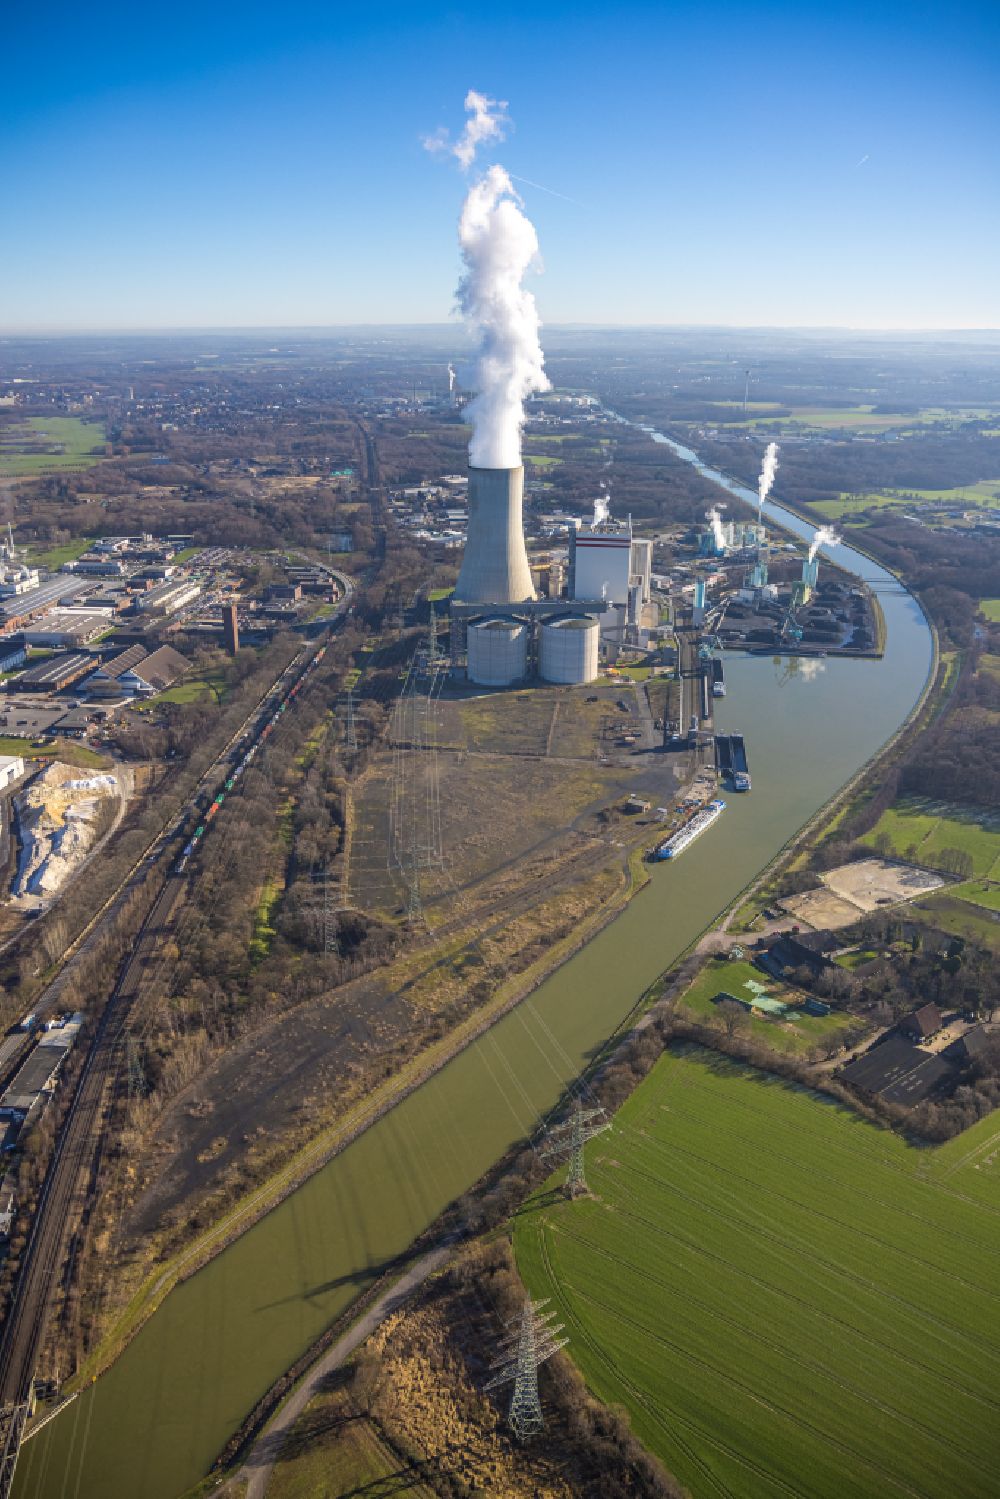 Lünen from above - Power plant facilities of the coal-fired combined heat and power plant Kohlekraftwerk Luenen GmbH & Co. KG in Luenen in the federal state of North Rhine-Westphalia - NRW, Germany